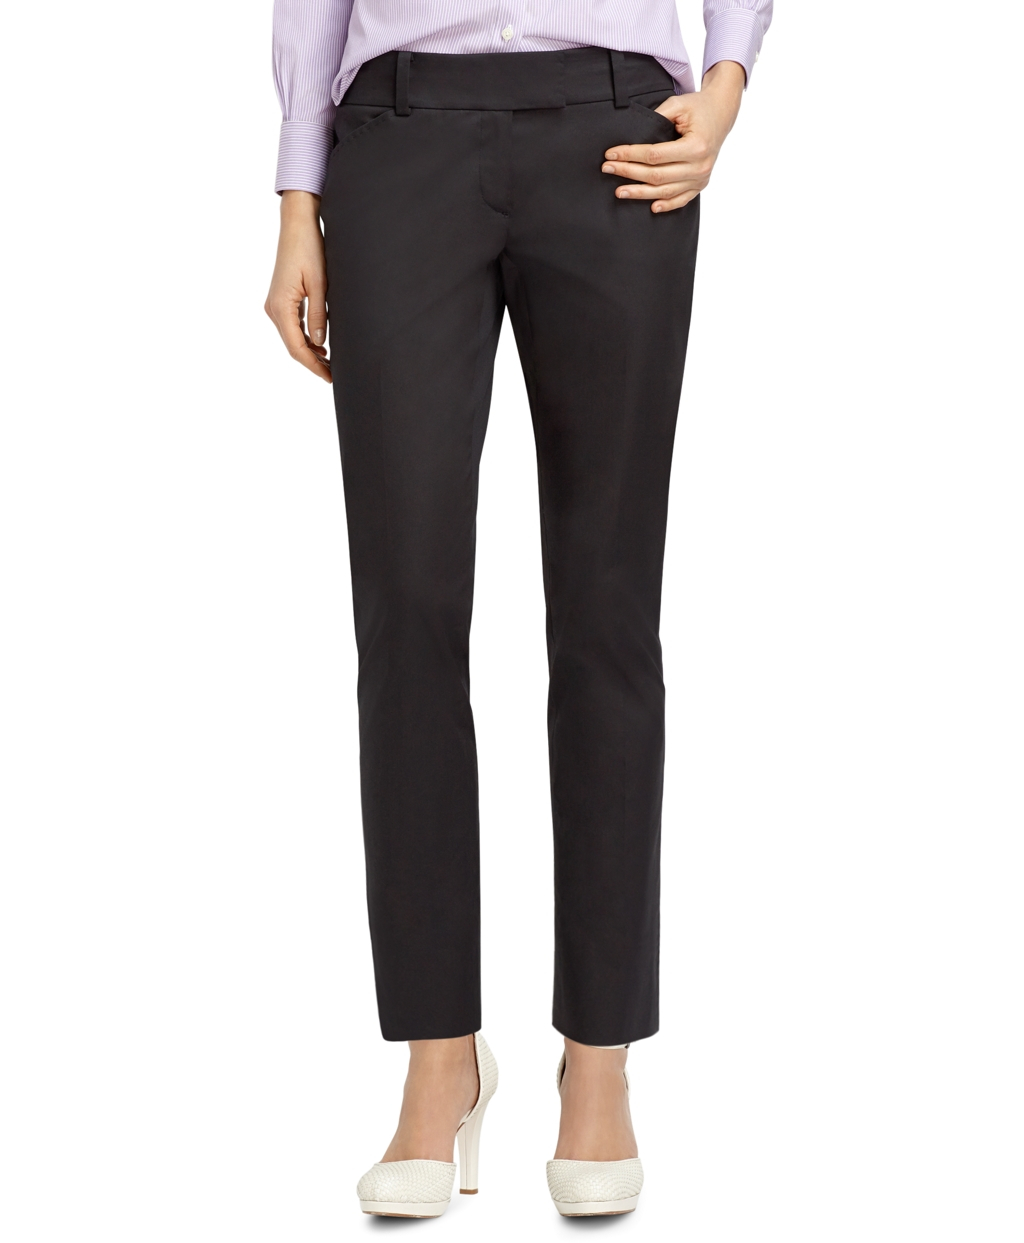 Brooks brothers Natalie Fit Stretch Pants in Black | Lyst